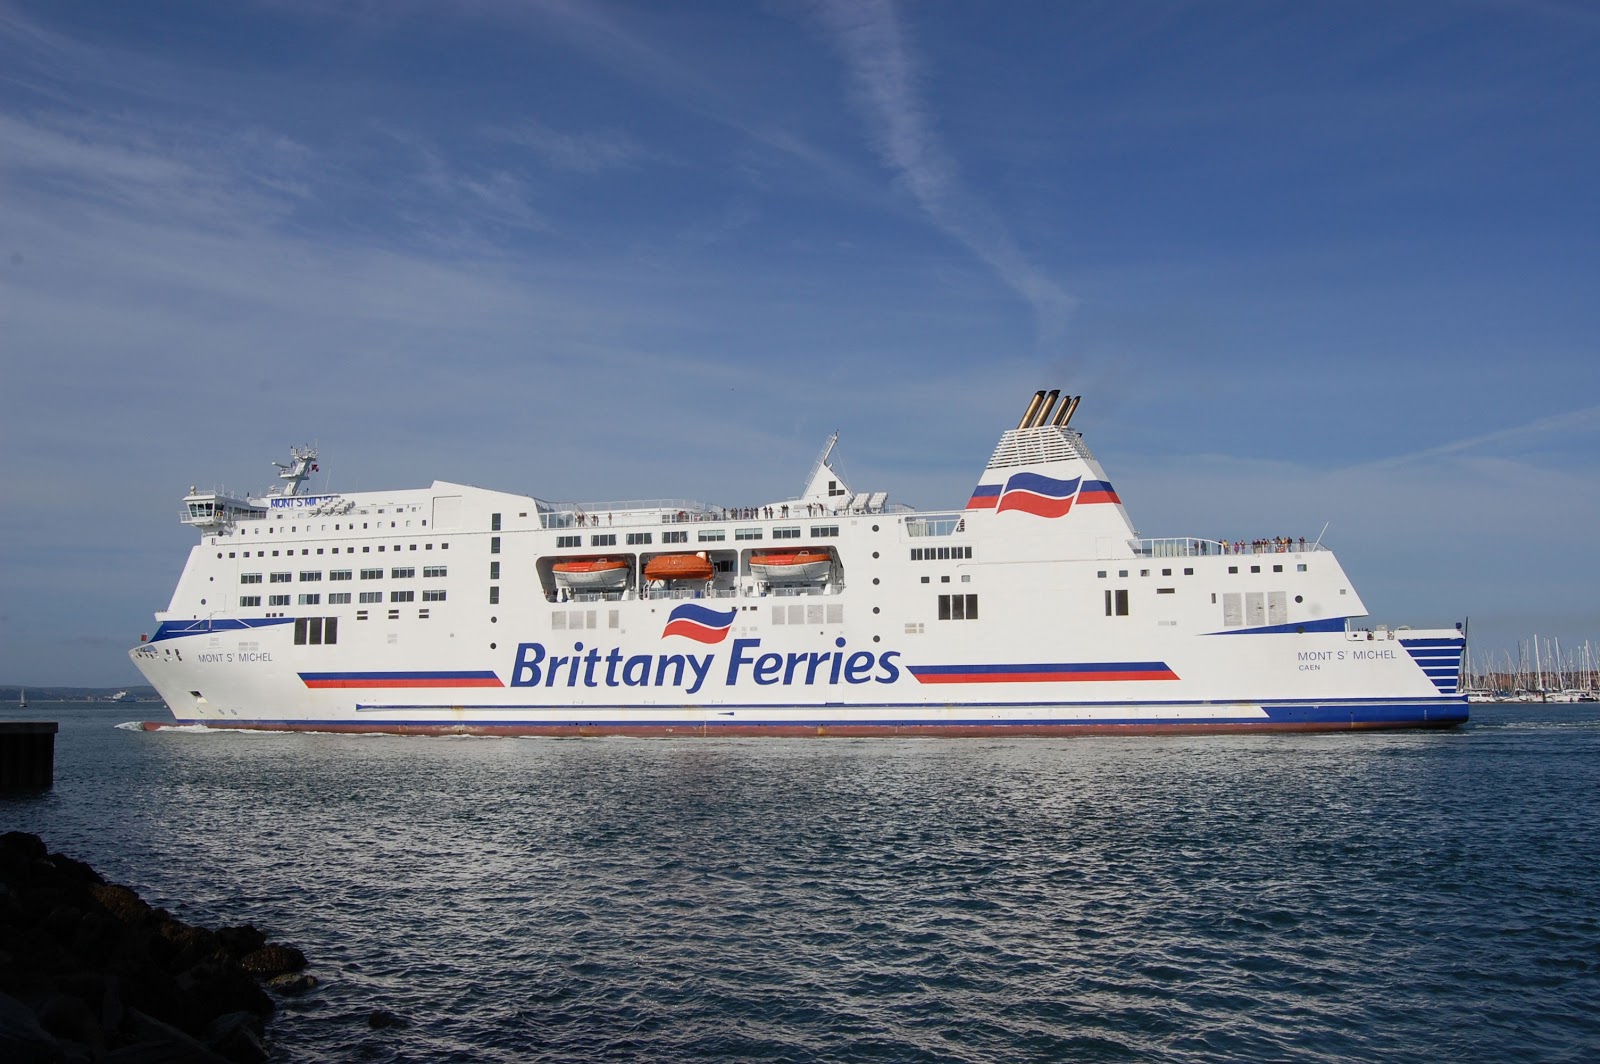 http www.brittany-ferries.co.uk guides ports caen